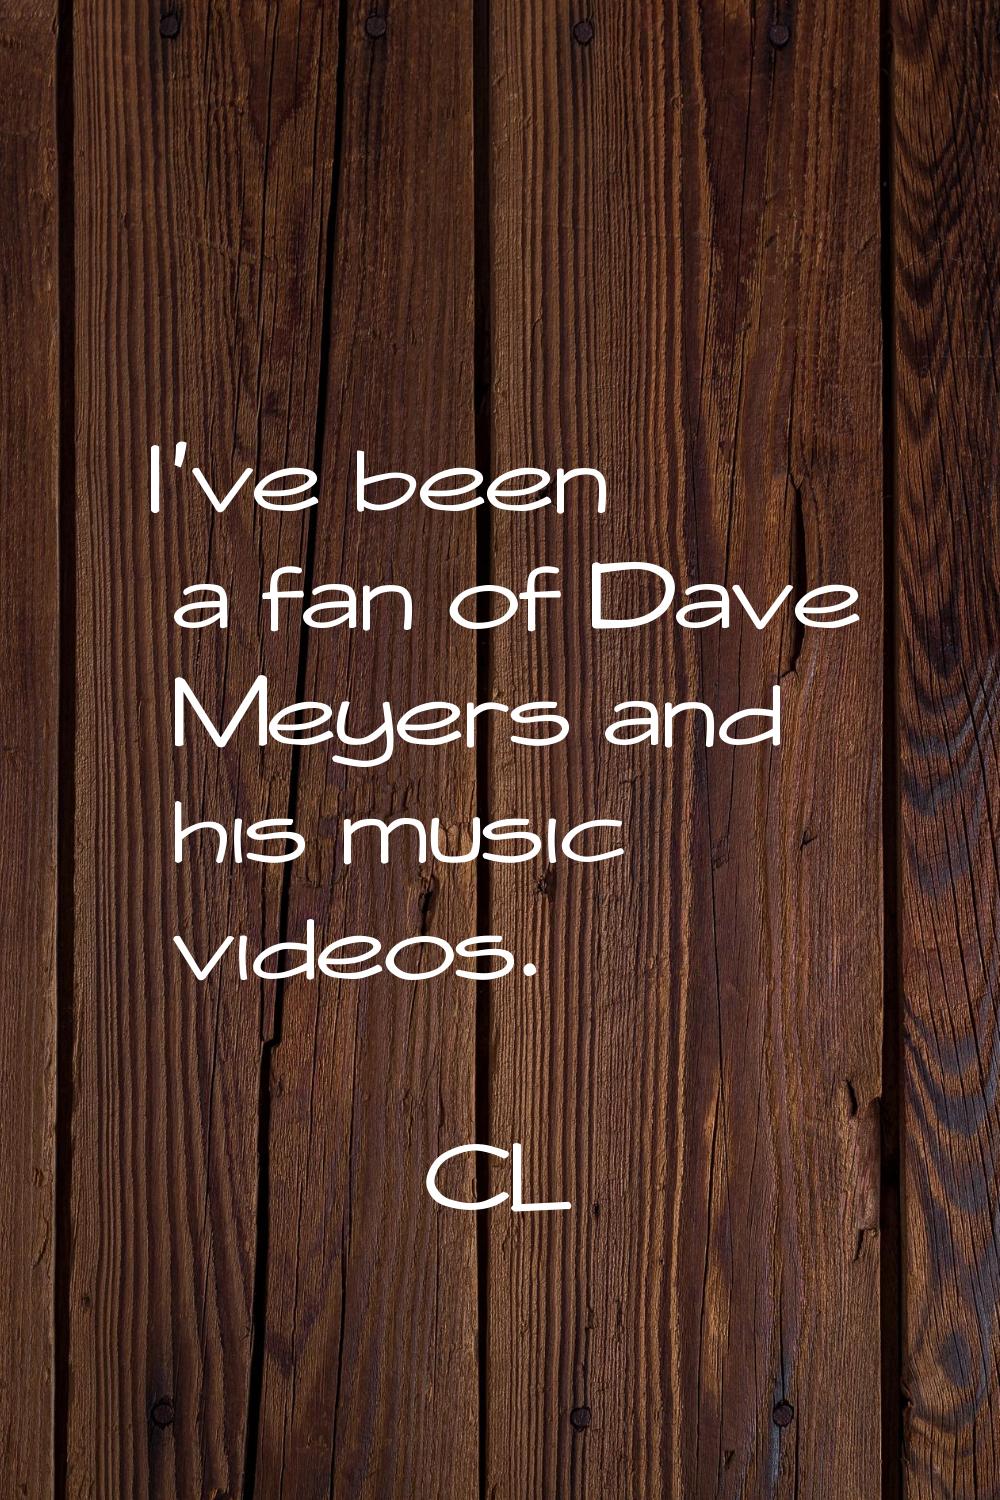 I've been a fan of Dave Meyers and his music videos.